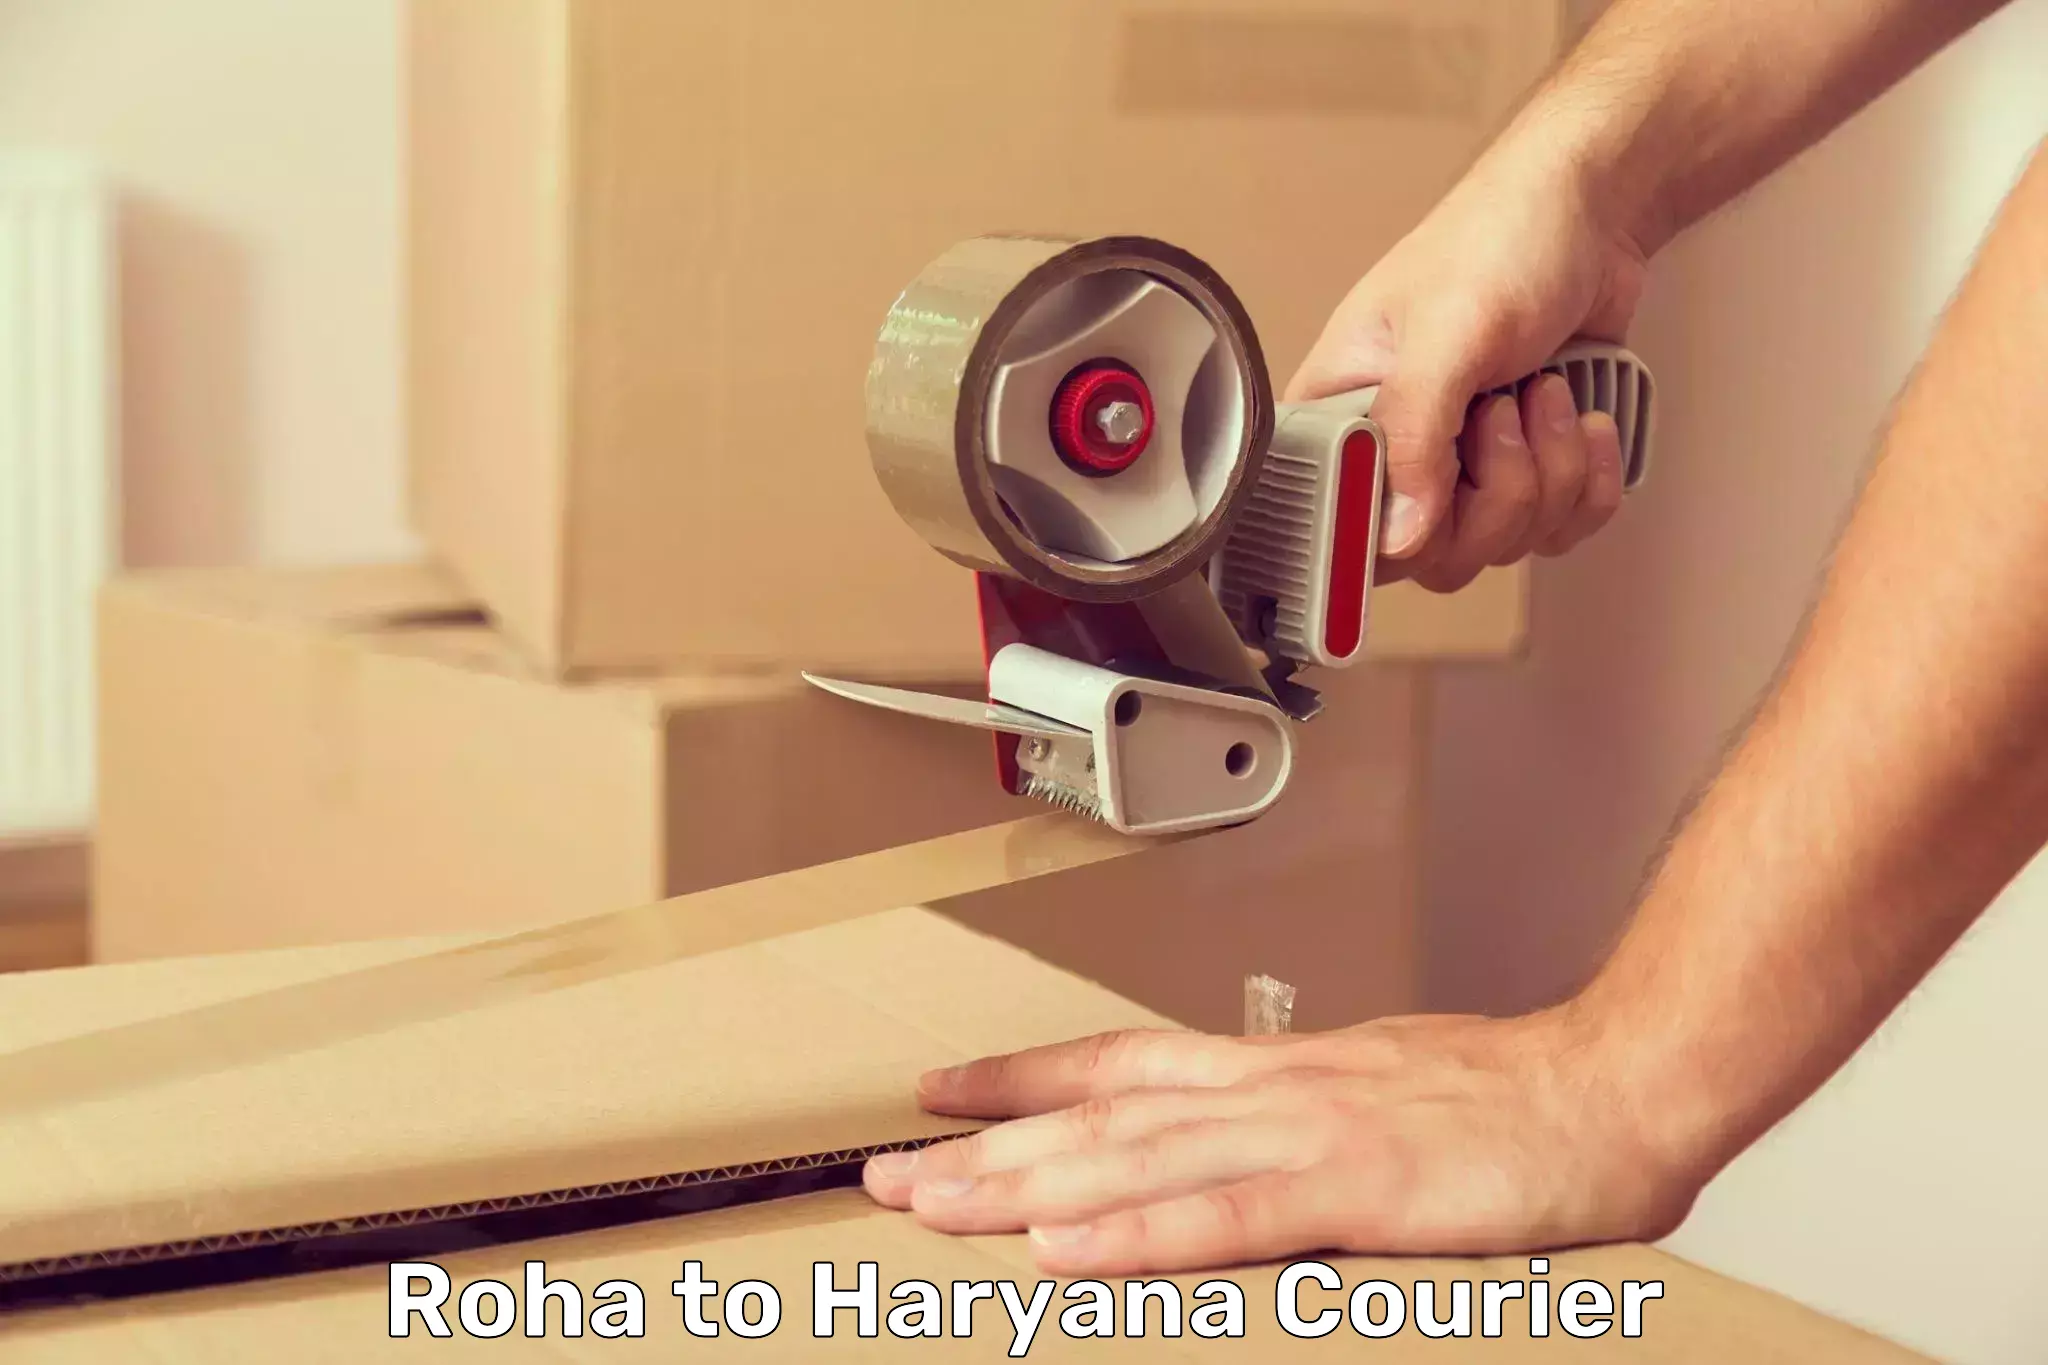 Business delivery service Roha to Gurgaon